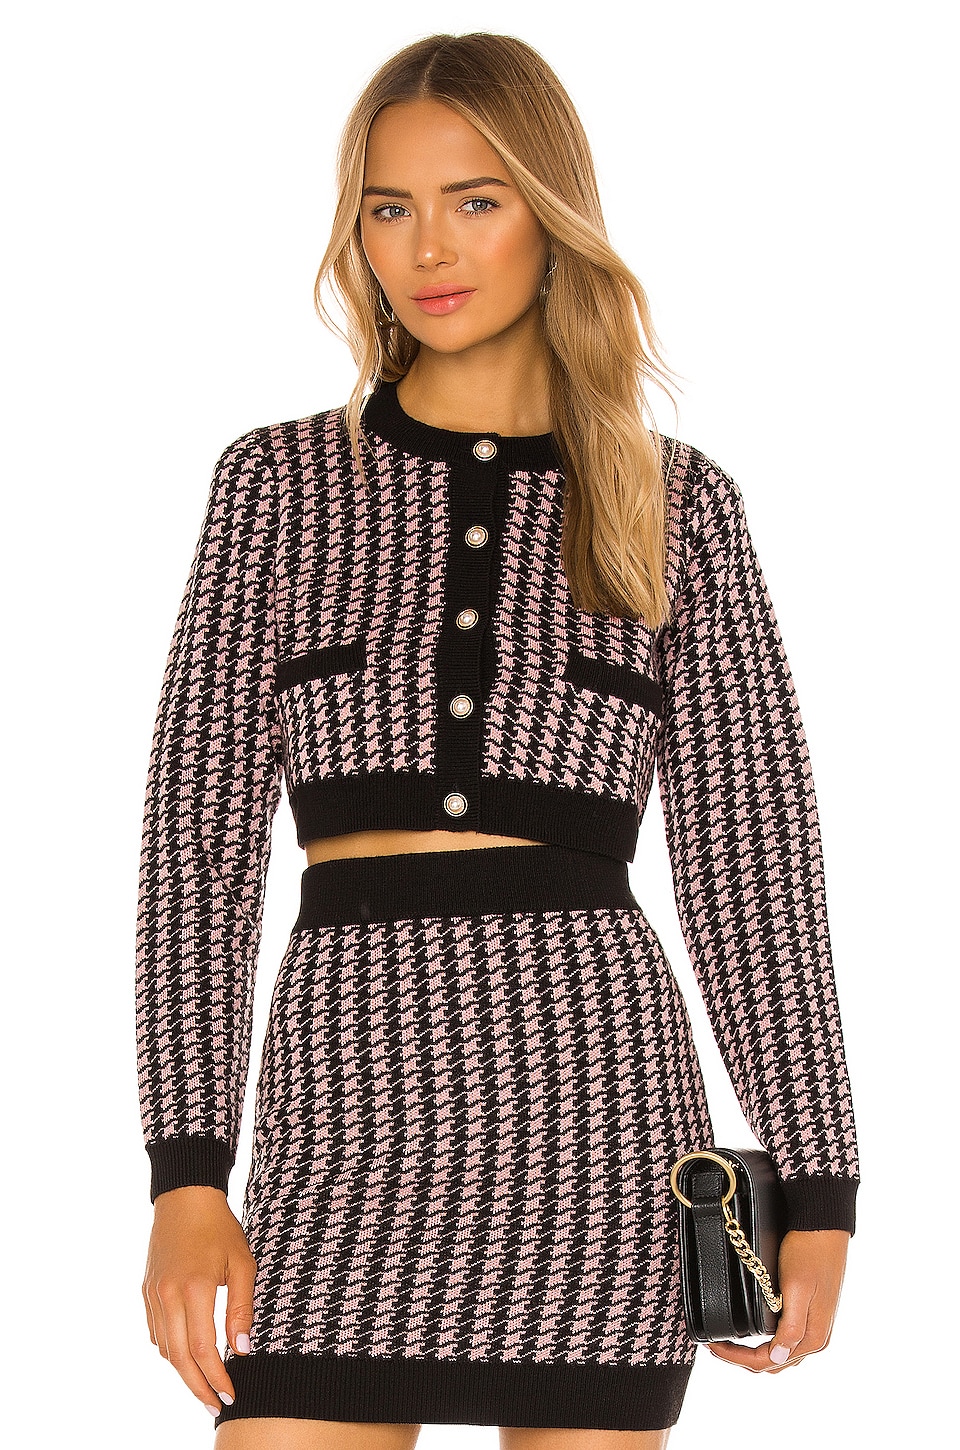 MAJORELLE Carrie Cardigan in Pink Houndstooth | REVOLVE